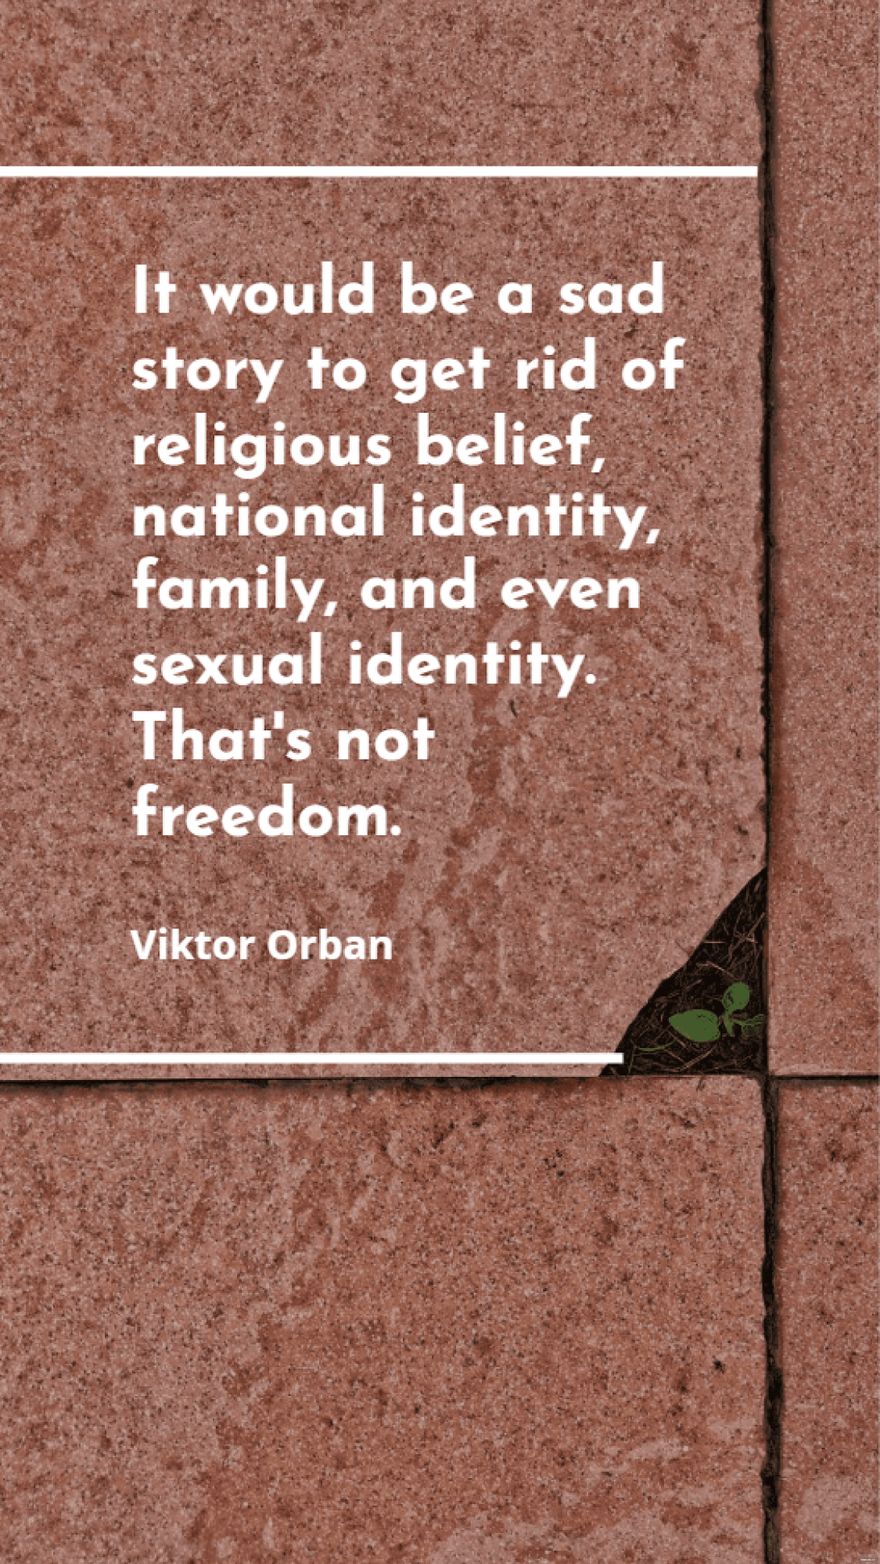 Viktor Orban - It would be a sad story to get rid of religious belief, national identity, family, and even sexual identity. That's not freedom.